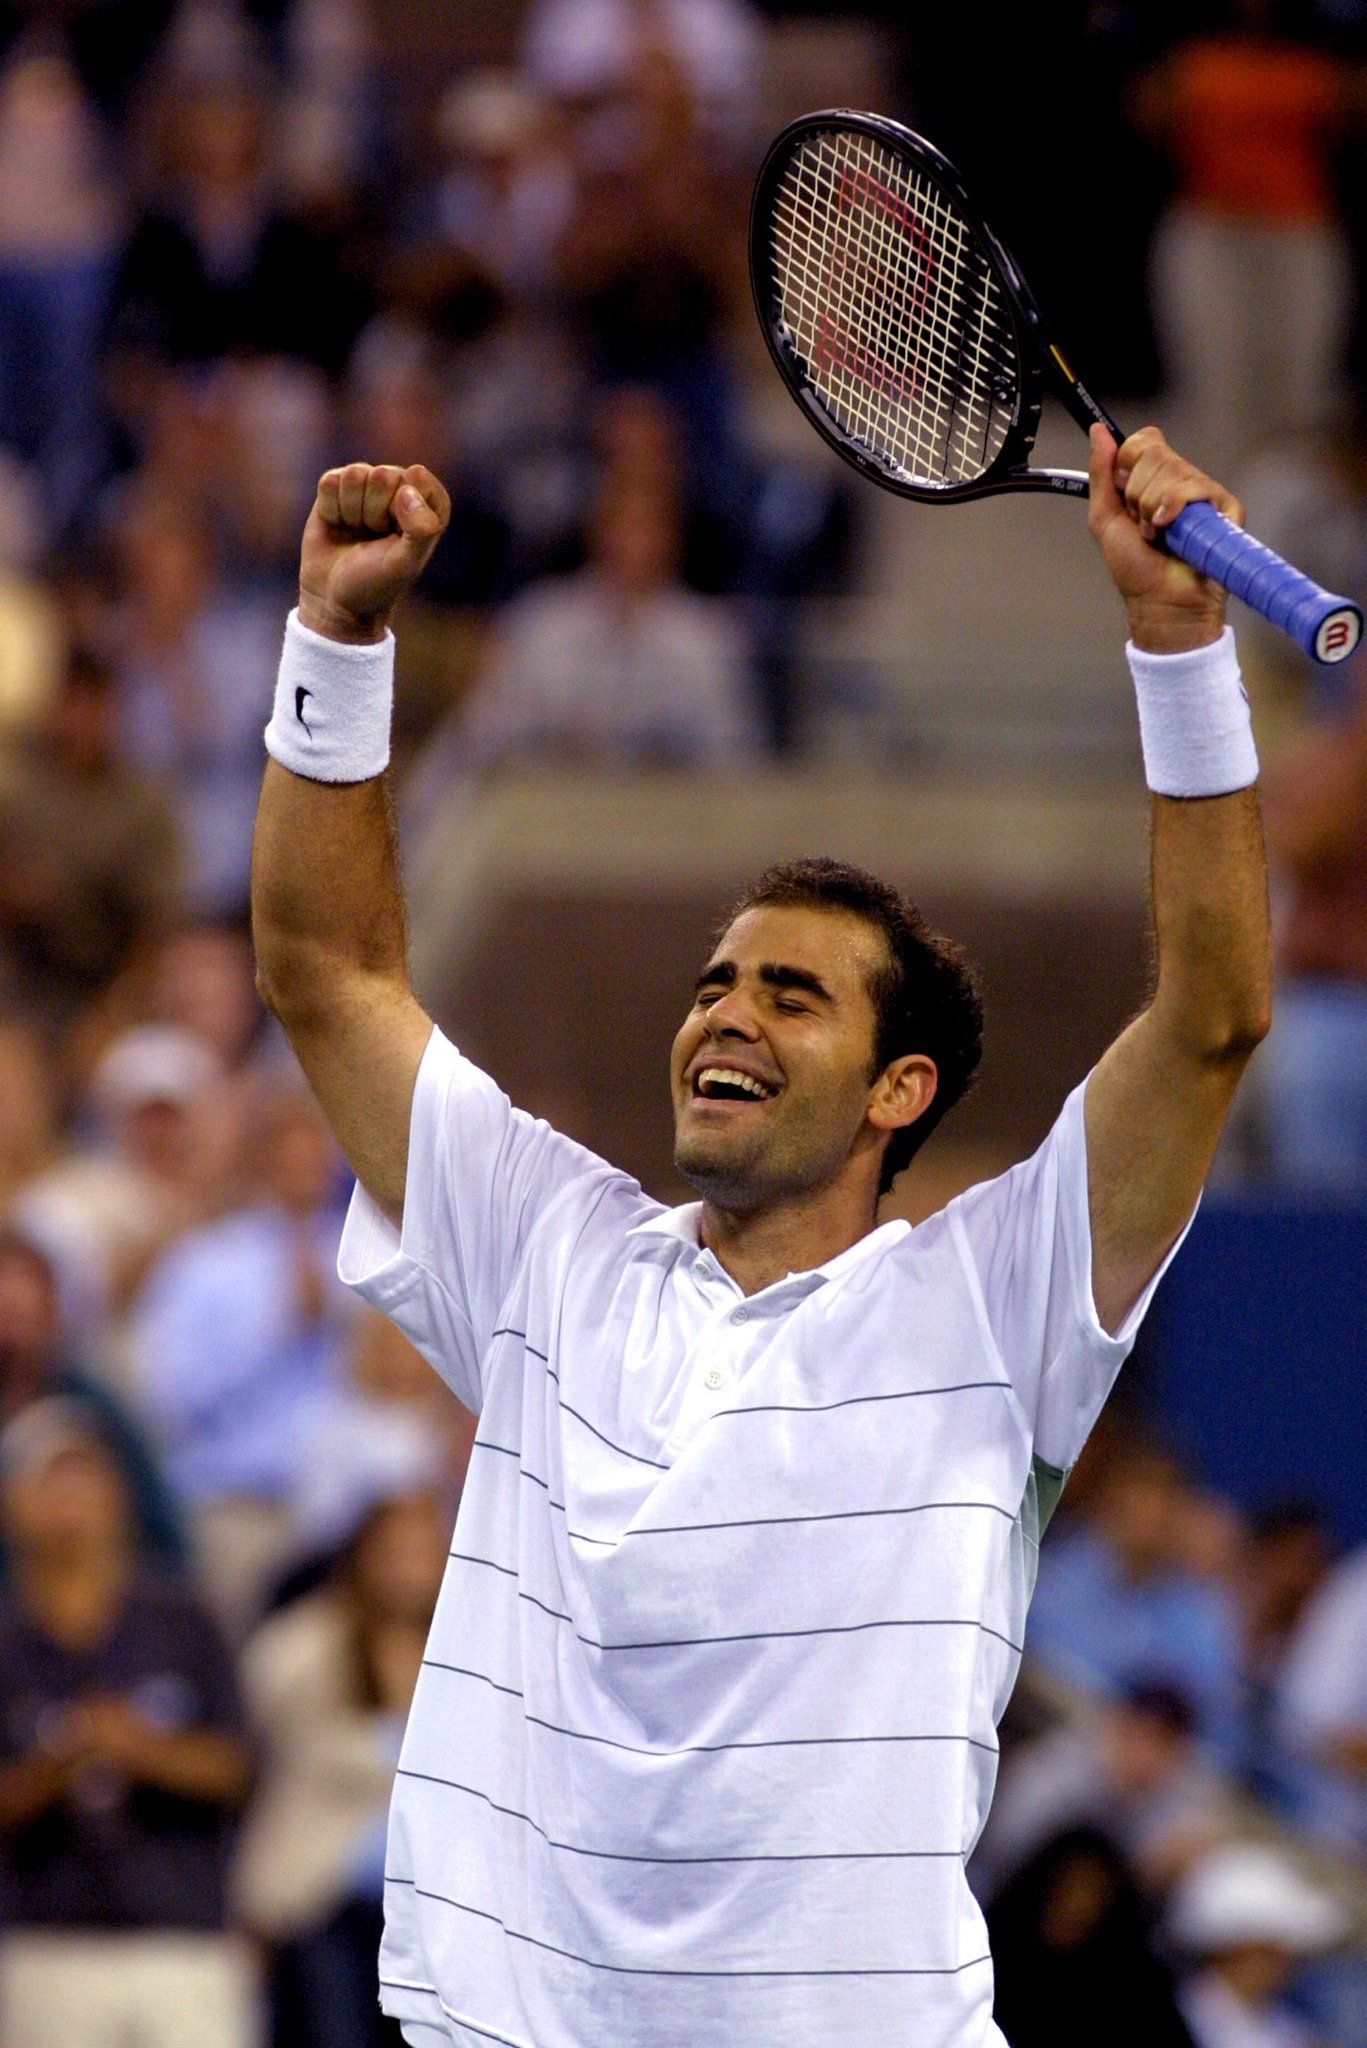 Happy Birthday to the great Pete Sampras! 